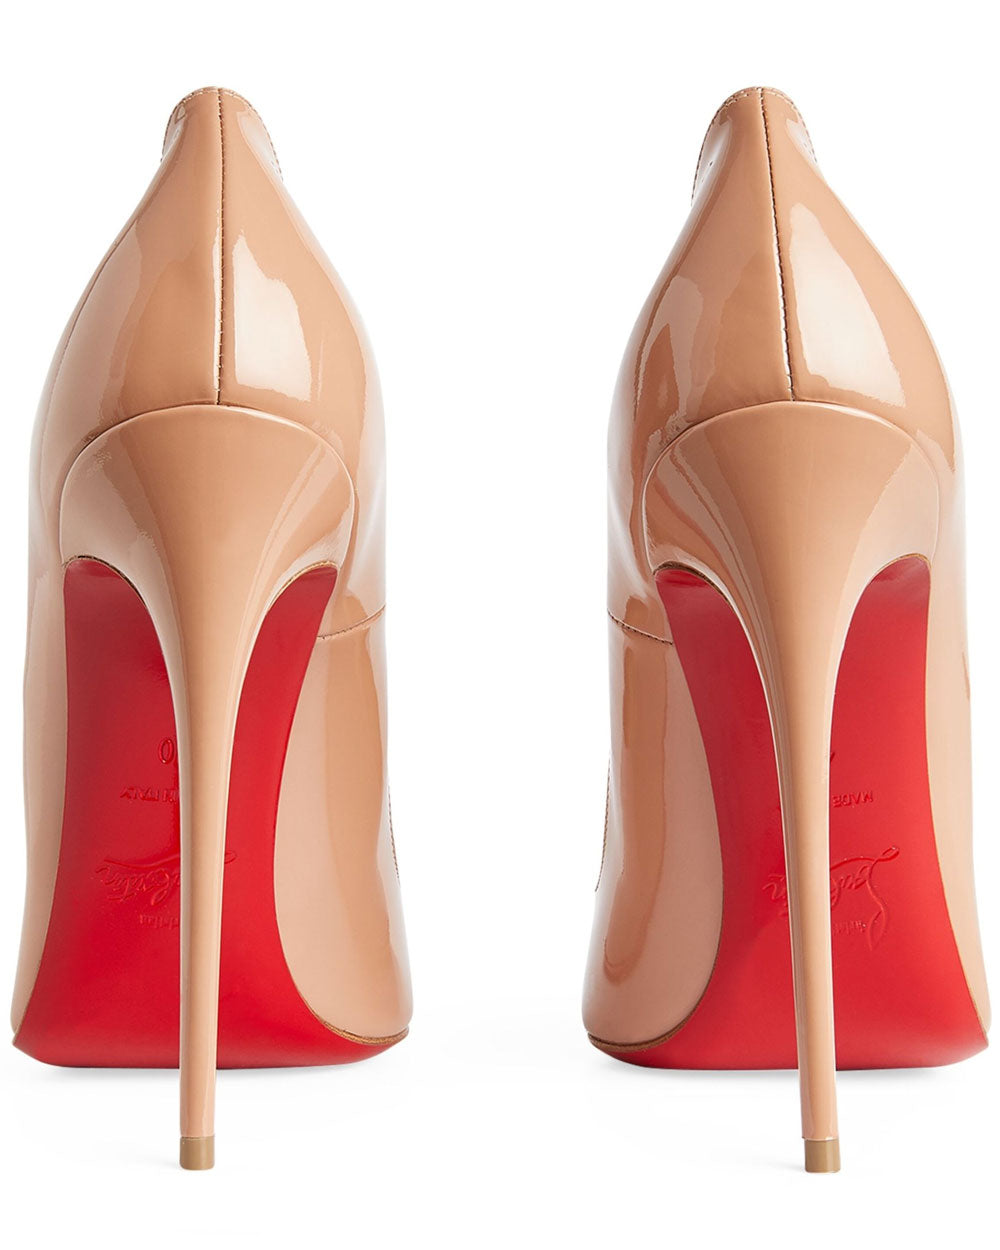 So Kate 120 Patent Leather Pumps in Nude – Stanley Korshak